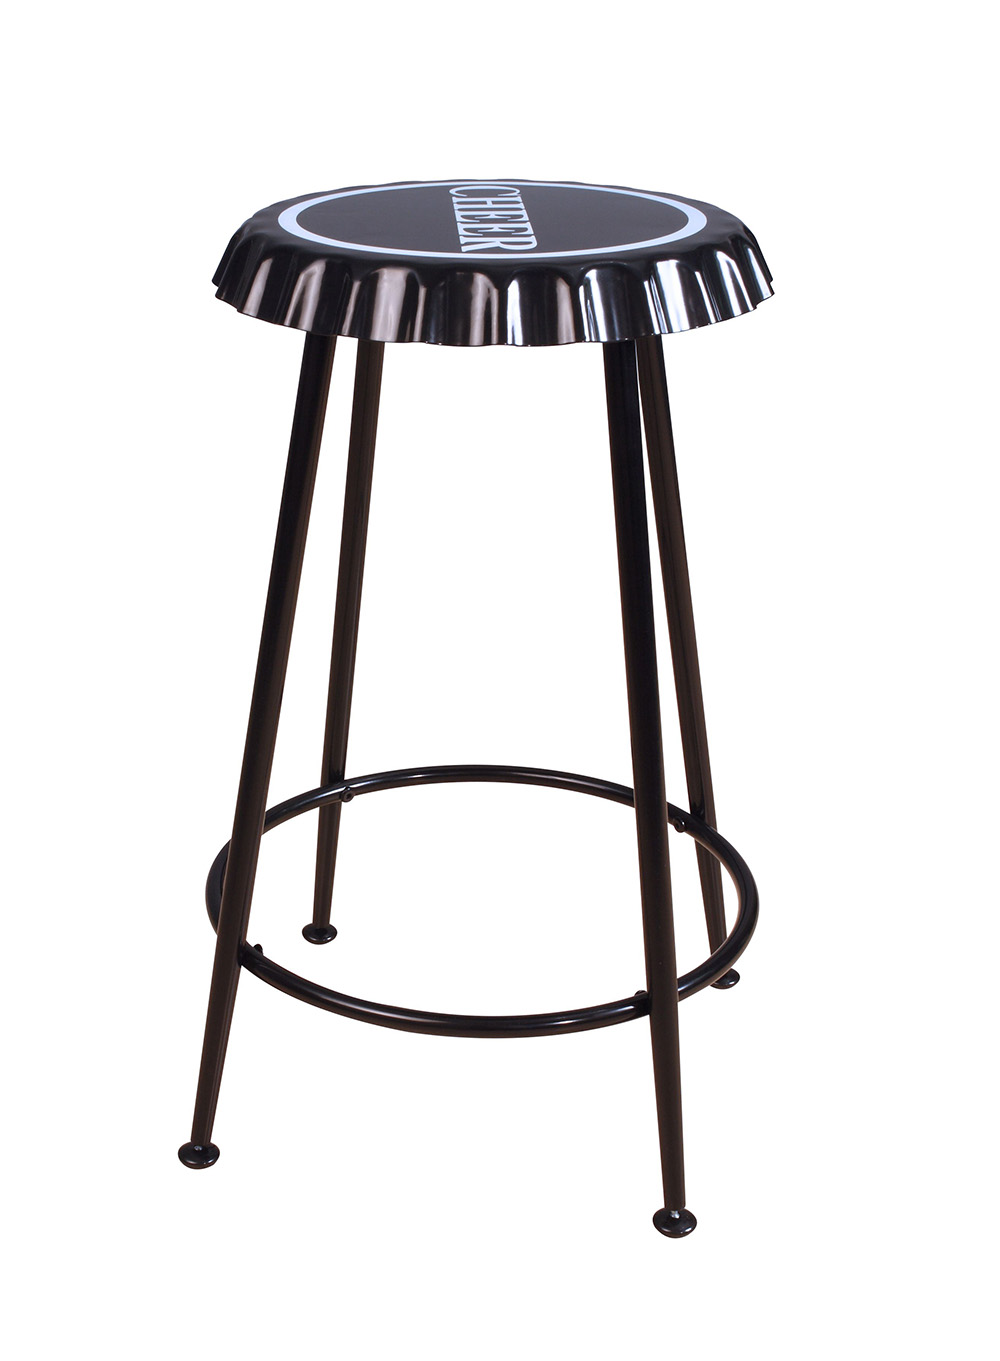 ACME Mant Counter Height Stool Set of 2, with Metal Frame, for Restaurant, Cafe, Tavern, Office, Living Room - Black